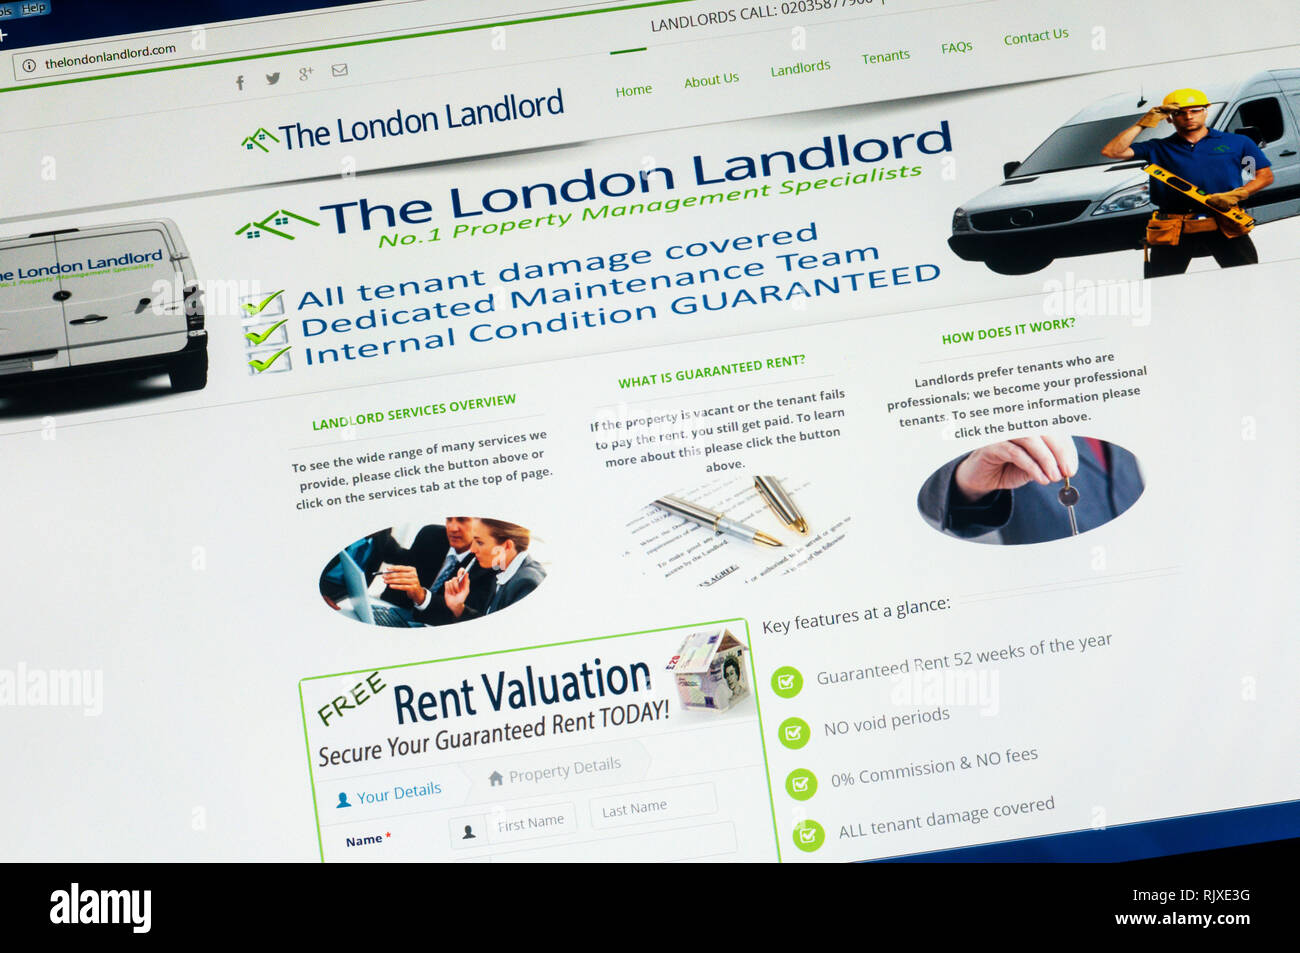 The home page of the website of The London Landlord property management company. Stock Photo